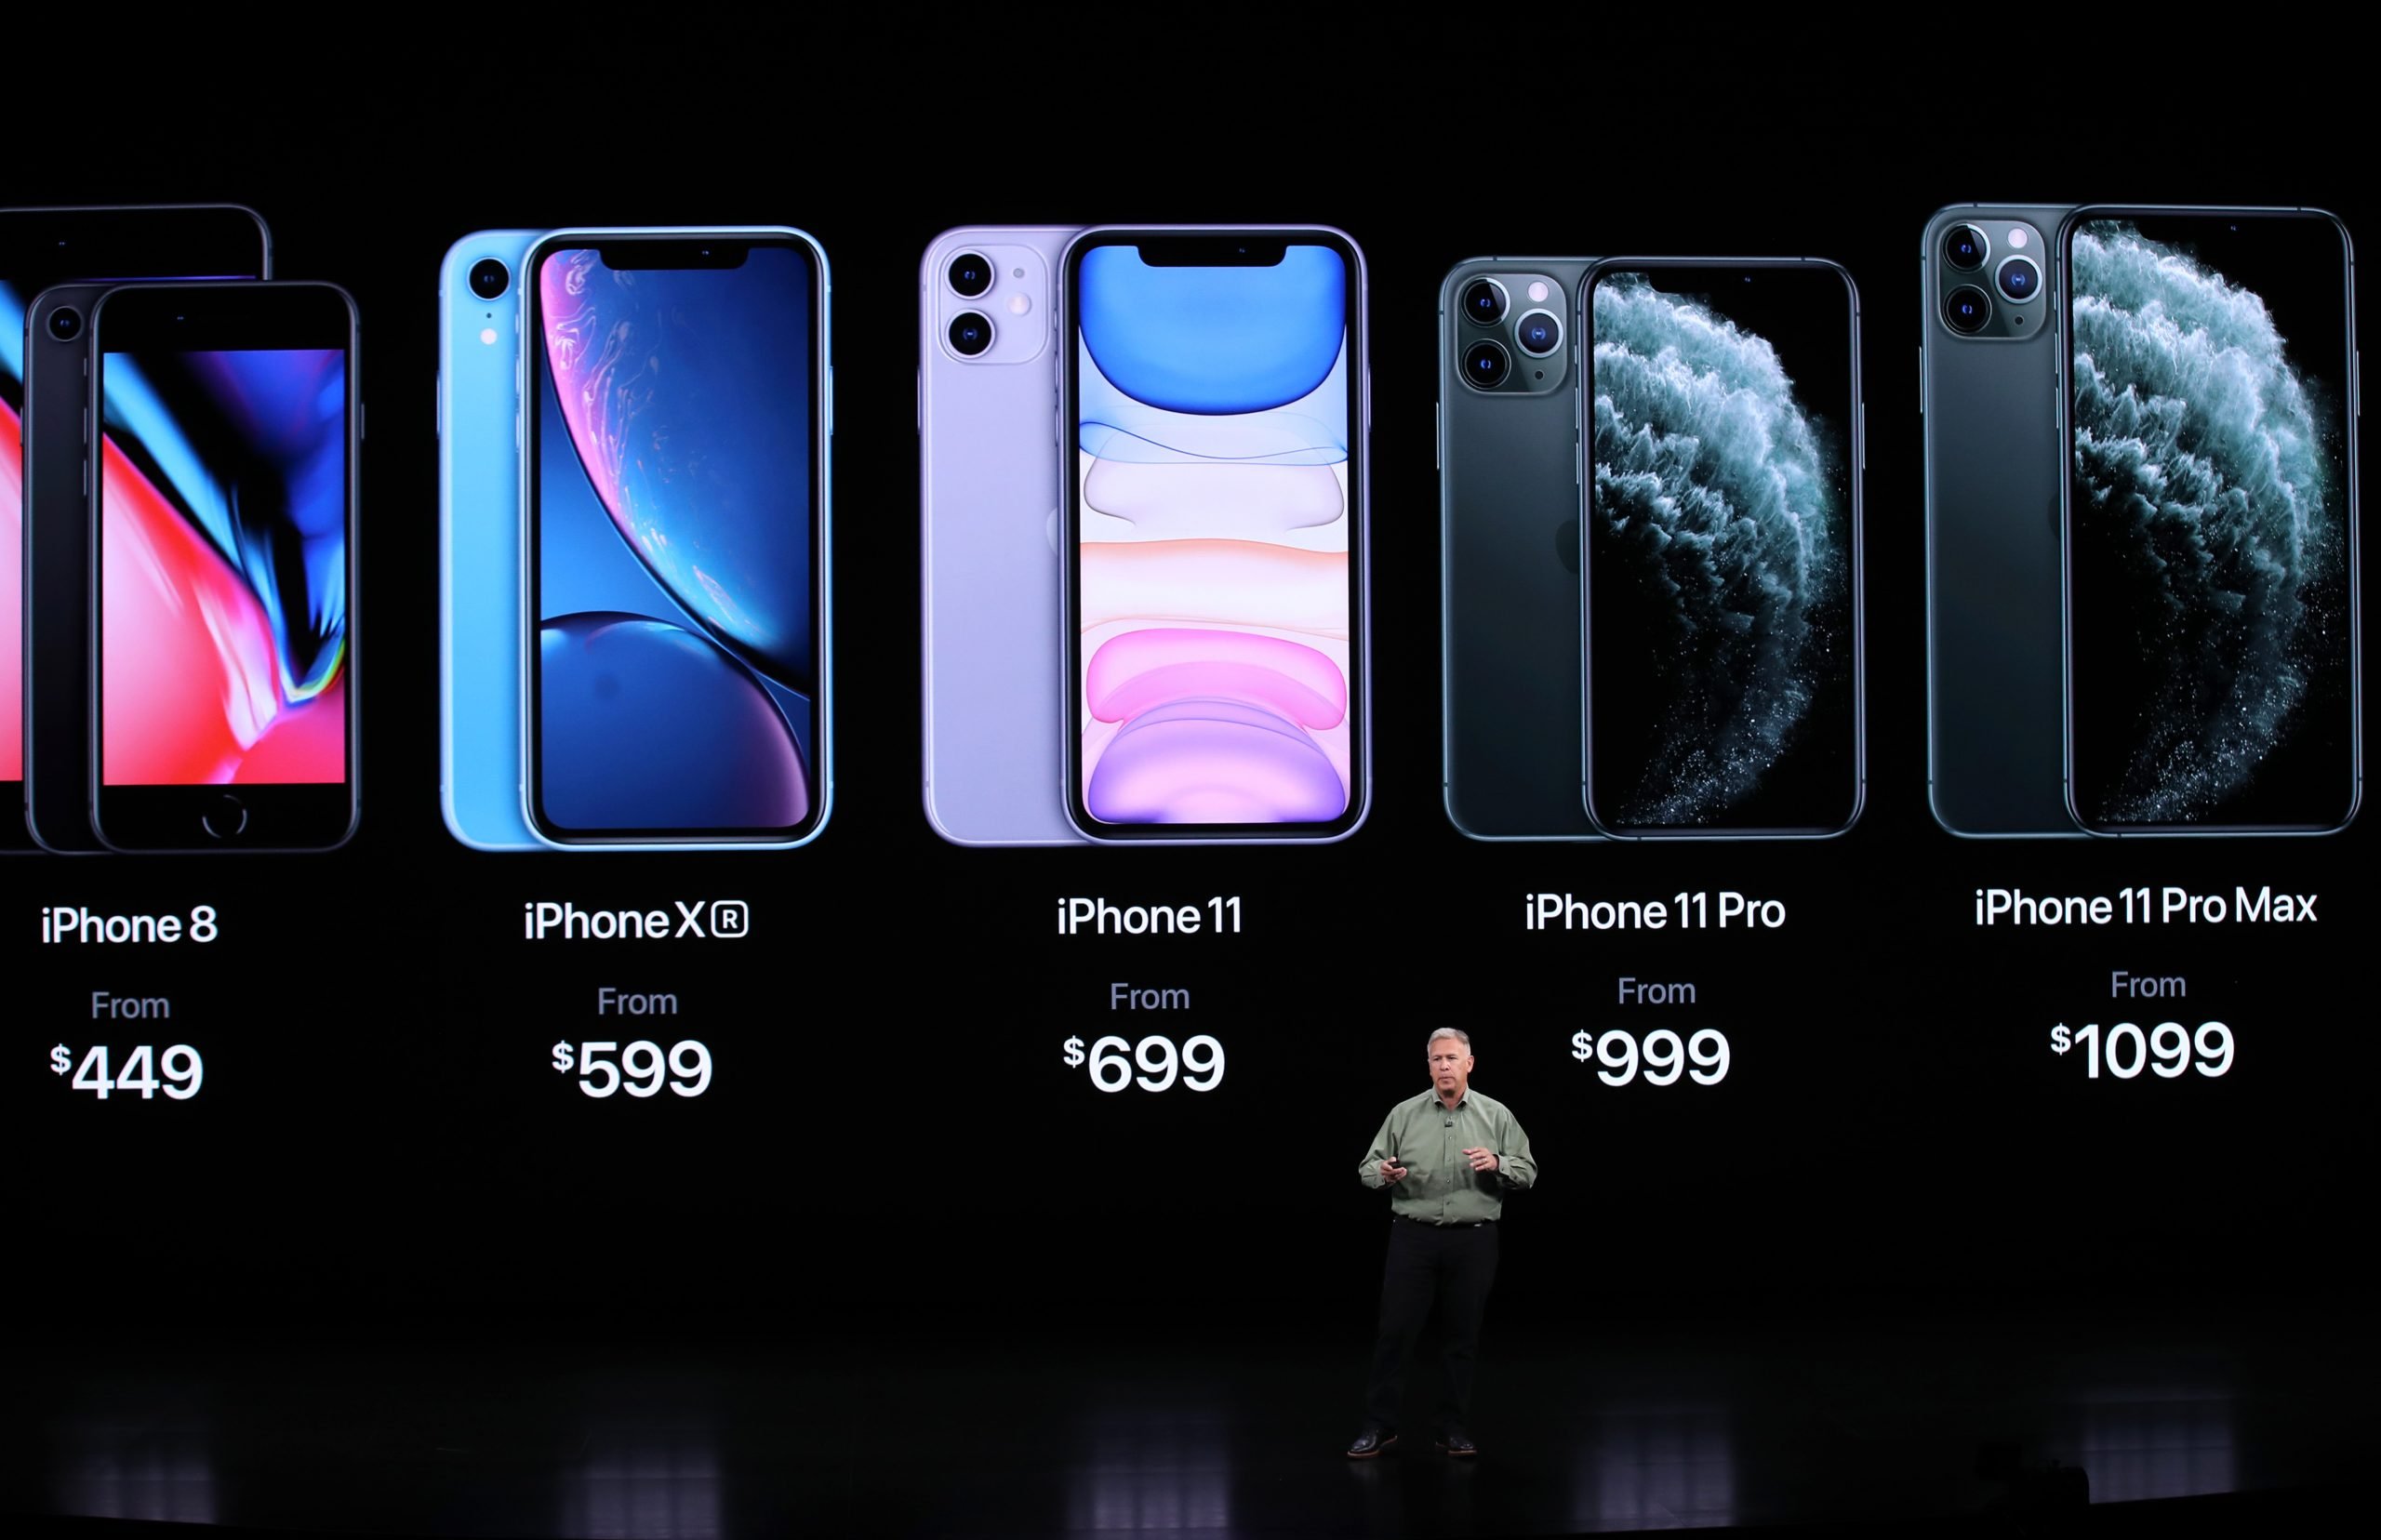 Apple iPhone Prices: How Much Does the New iPhone Cost?